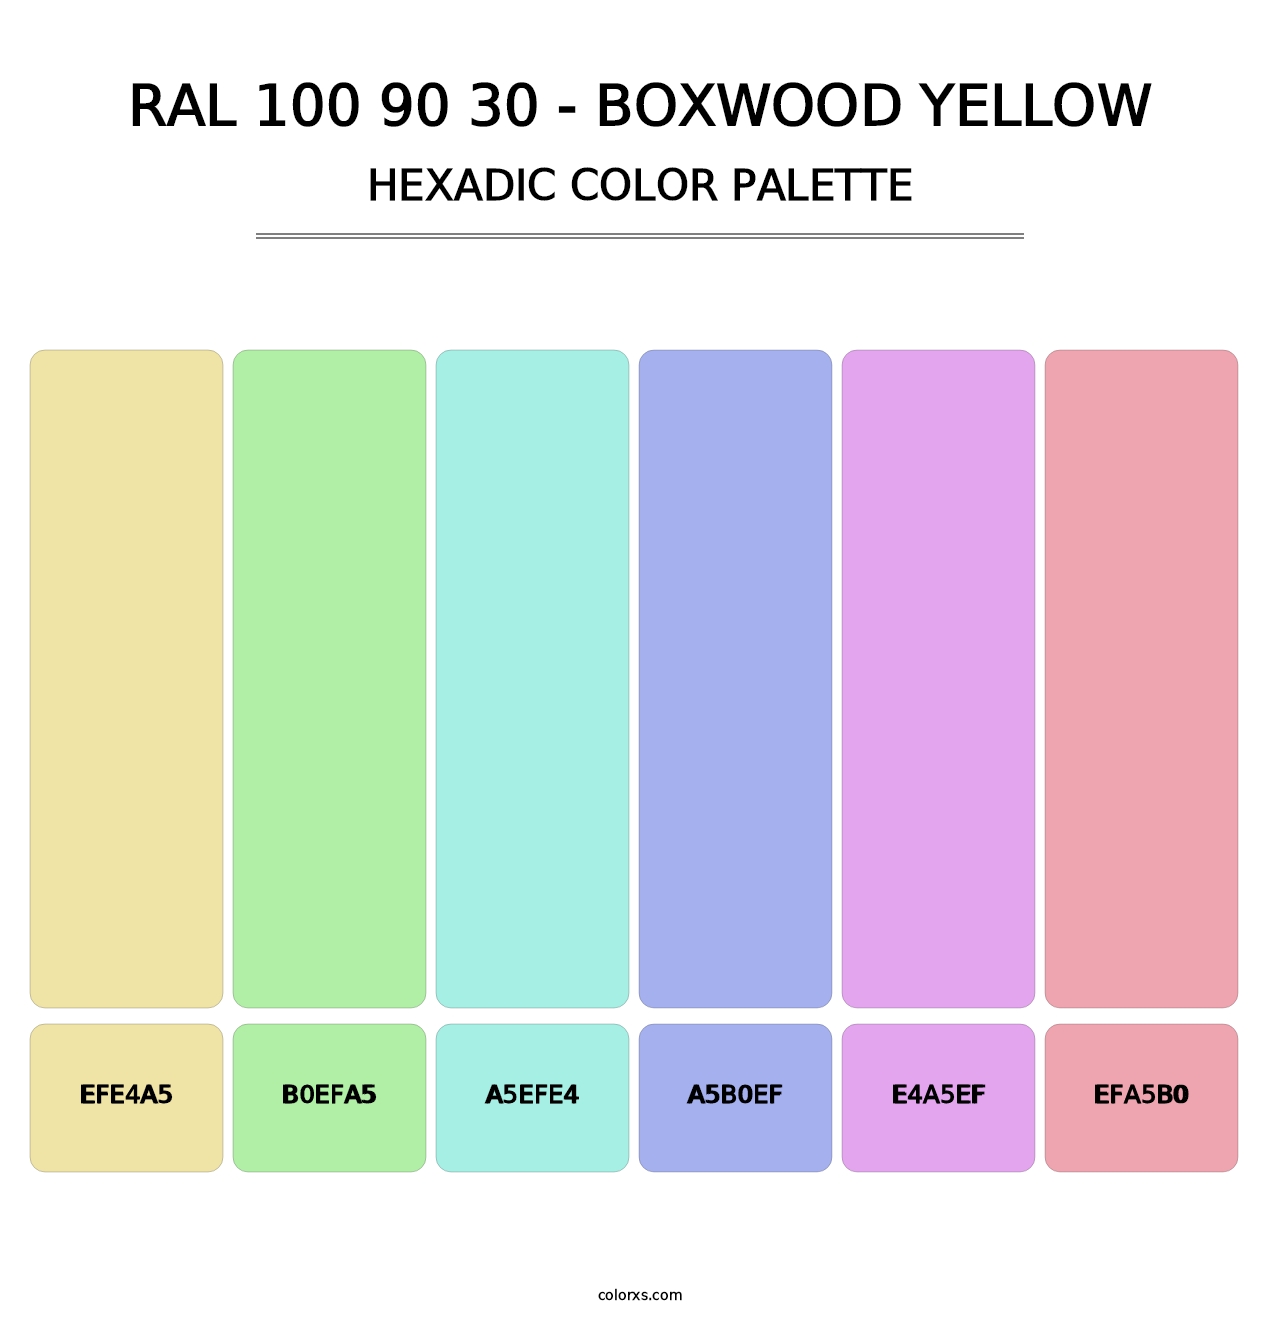 RAL 100 90 30 - Boxwood Yellow - Hexadic Color Palette